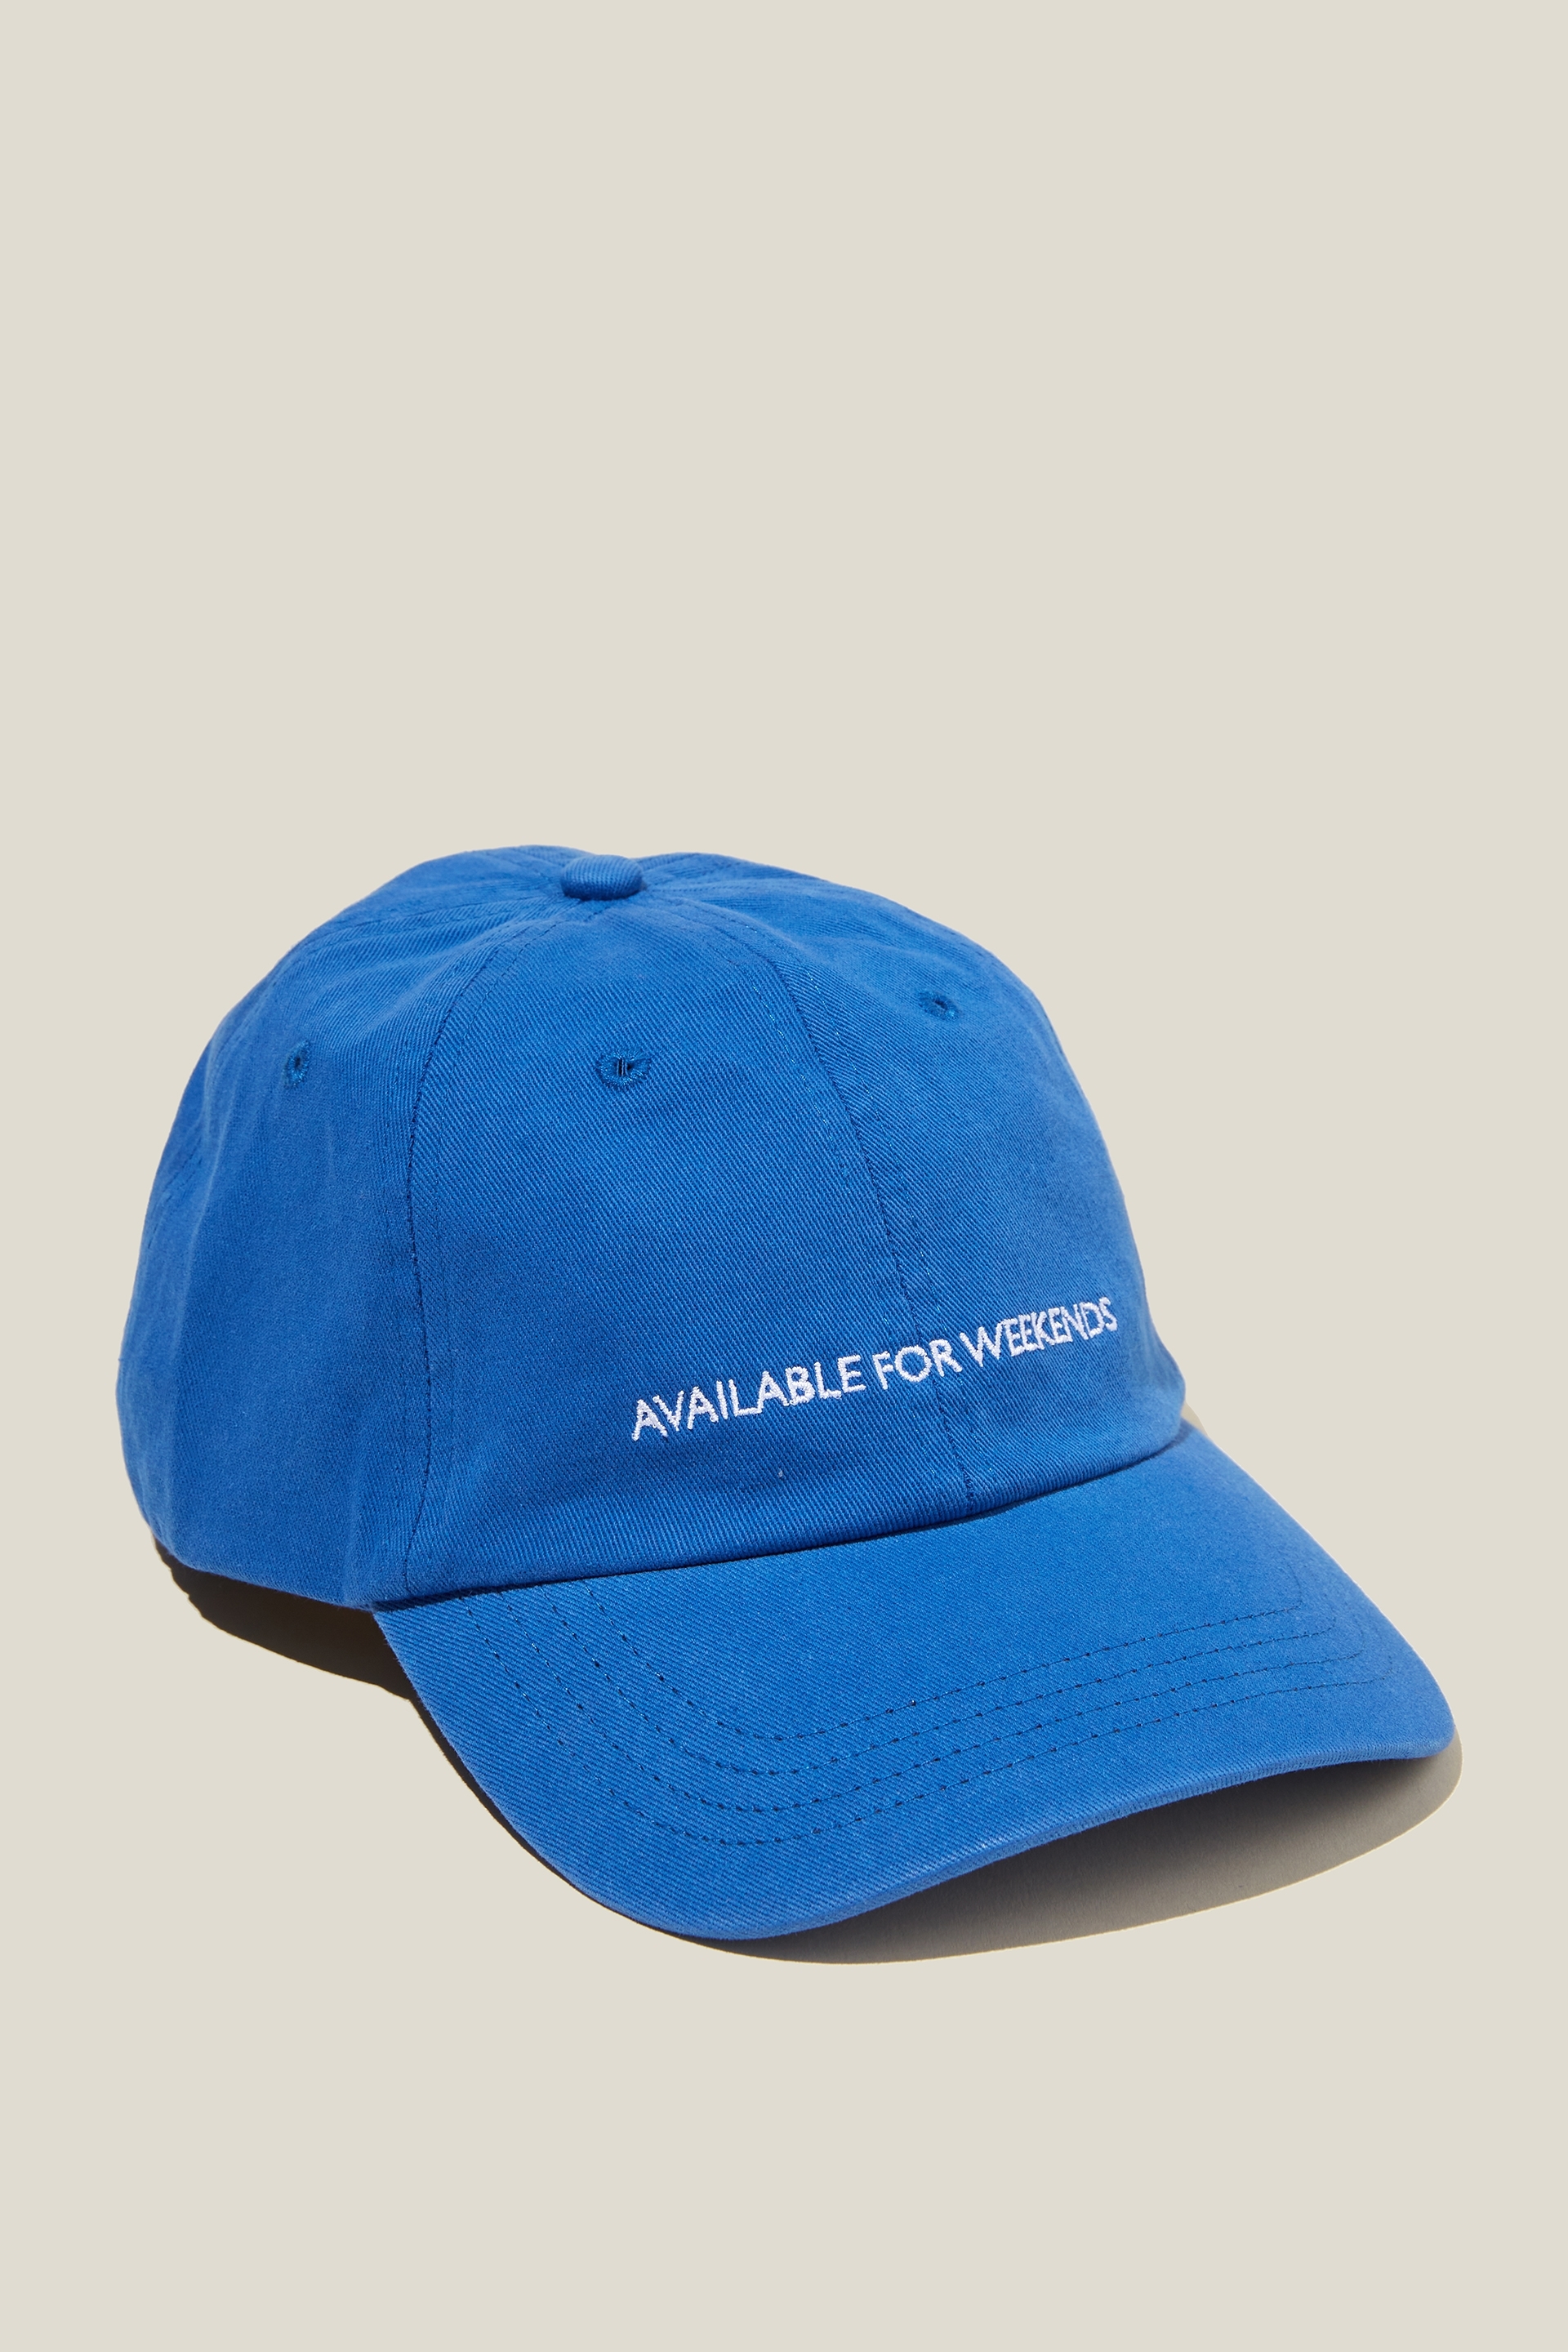 Rubi - Classic Dad Cap - Available for weekends/cobalt